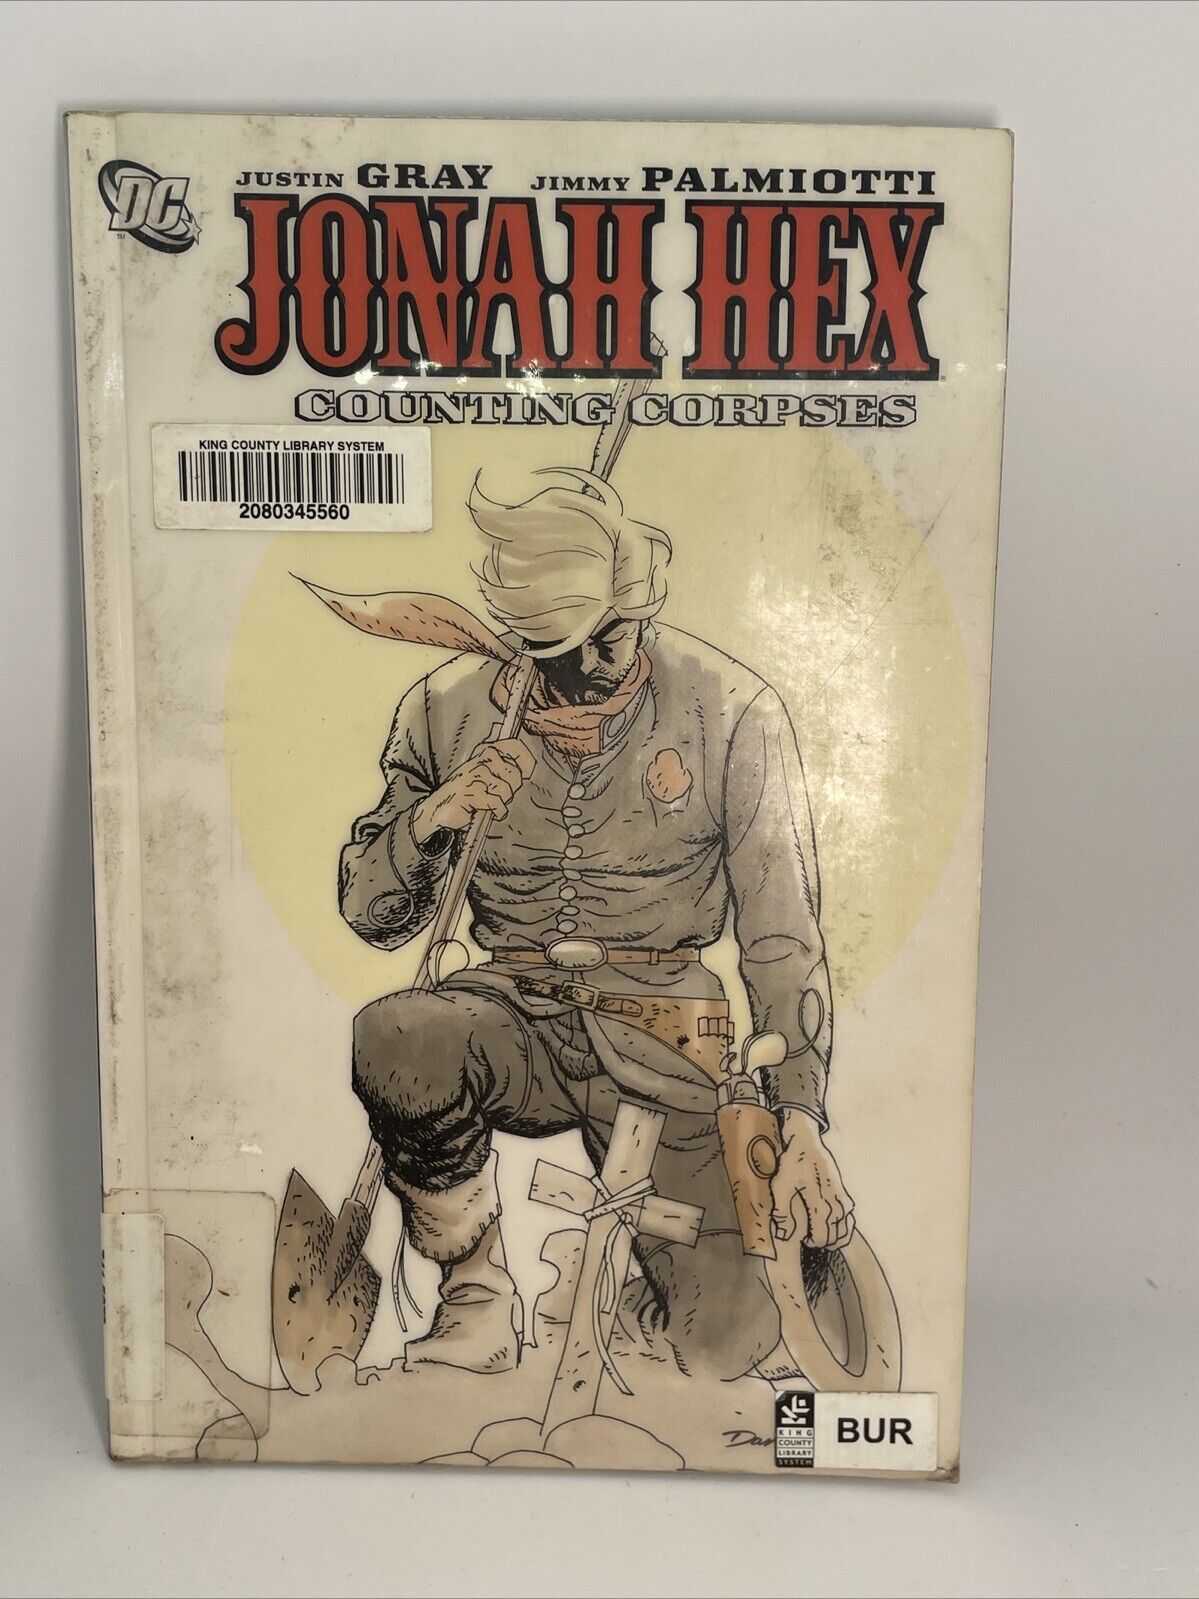 JONAH HEX: COUNTING CORPSES (ALL STAR WESTERN) By Jimmy Palmiotti & Justin Gray